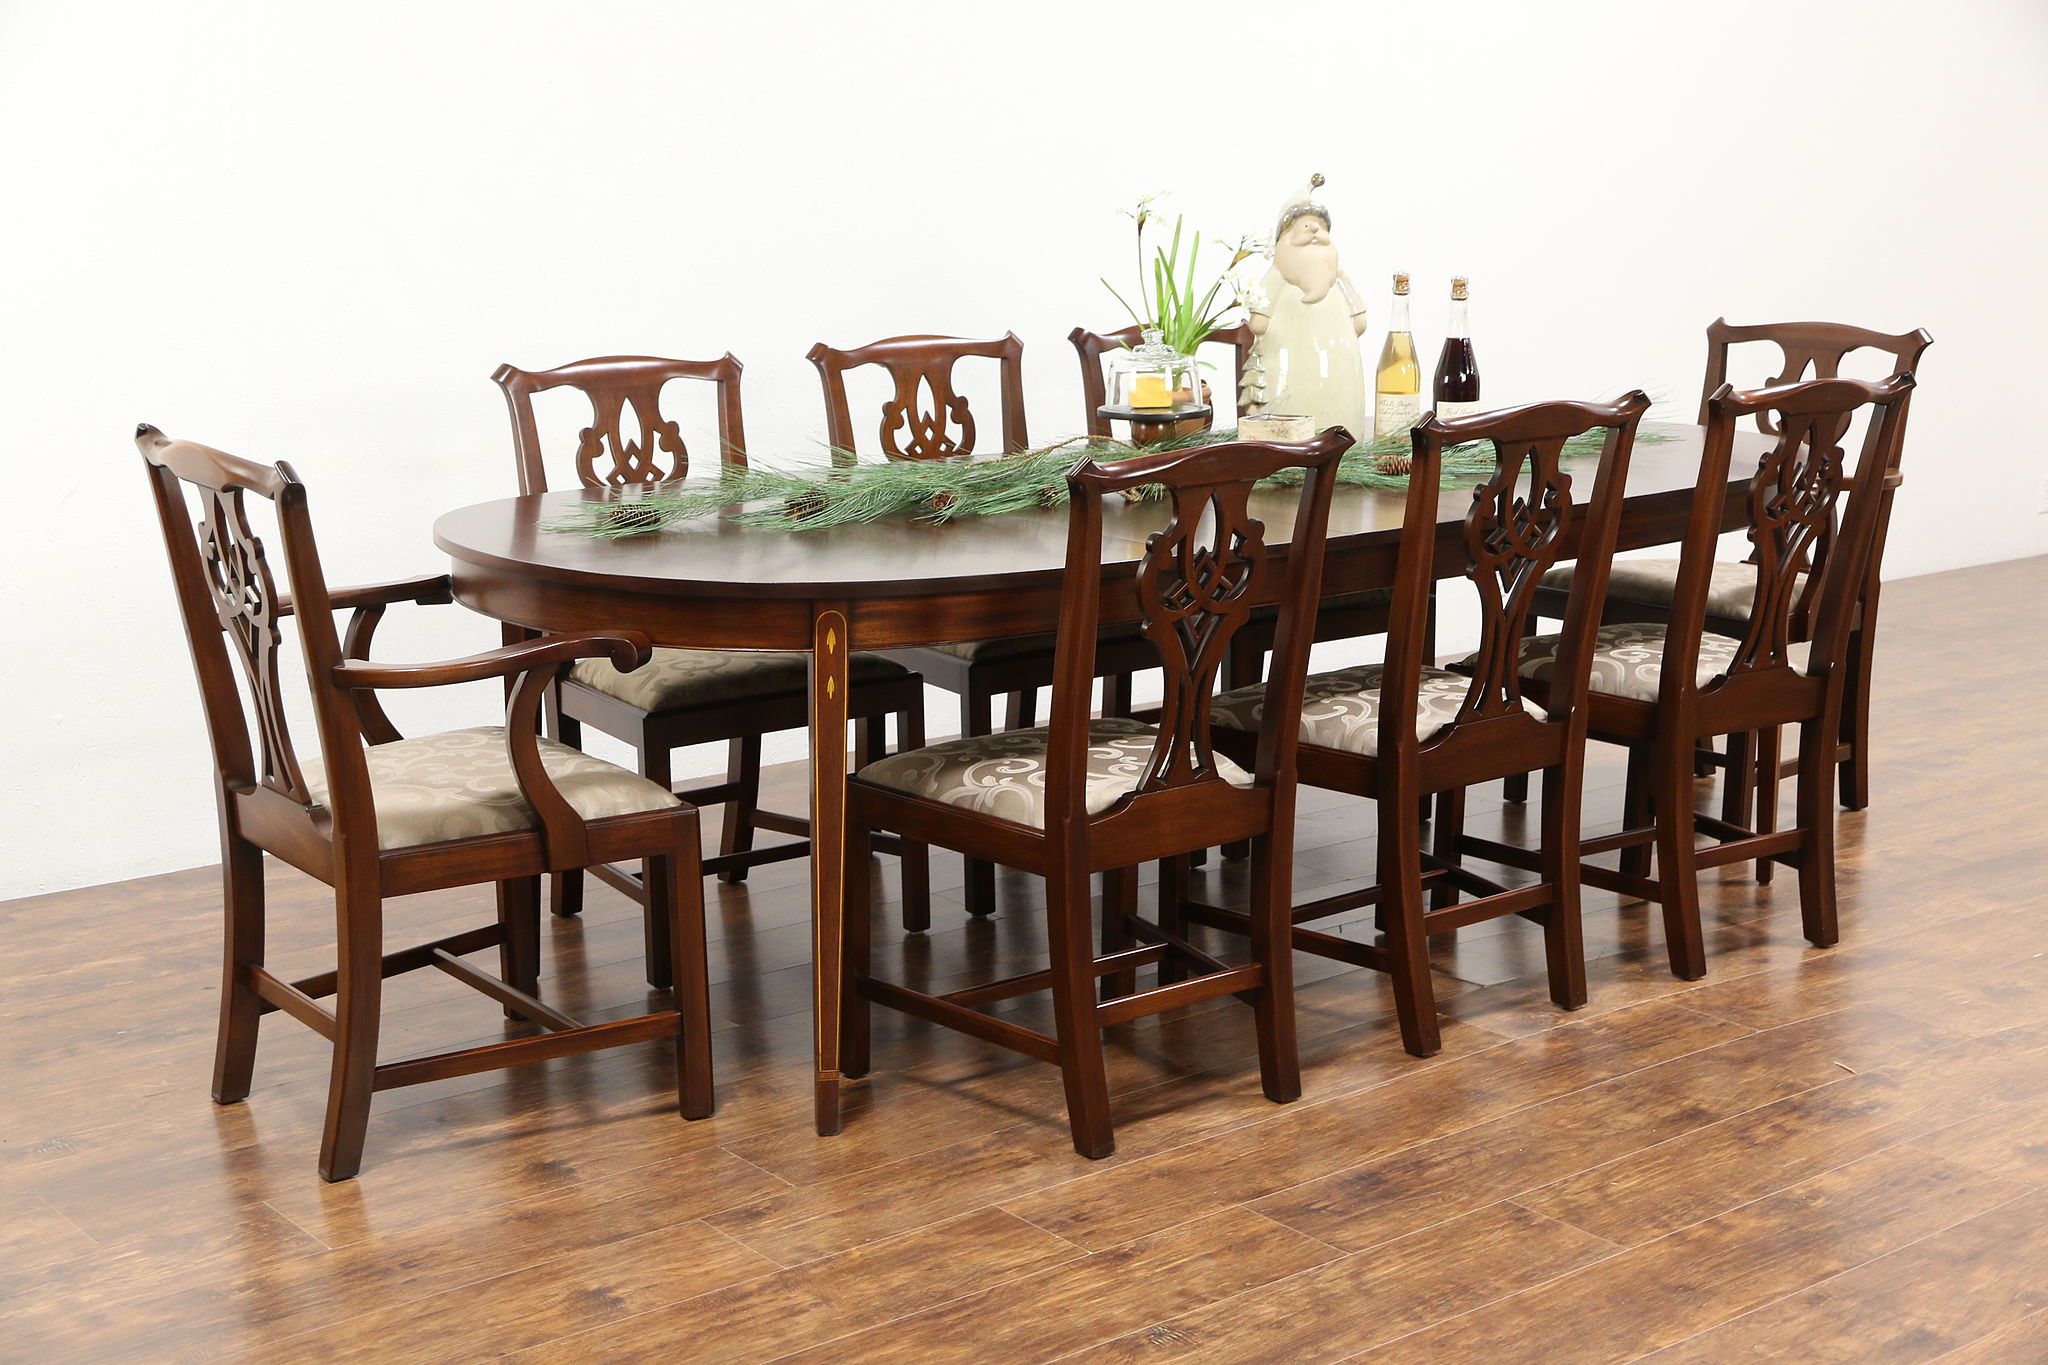 Traditional Dining Room Table